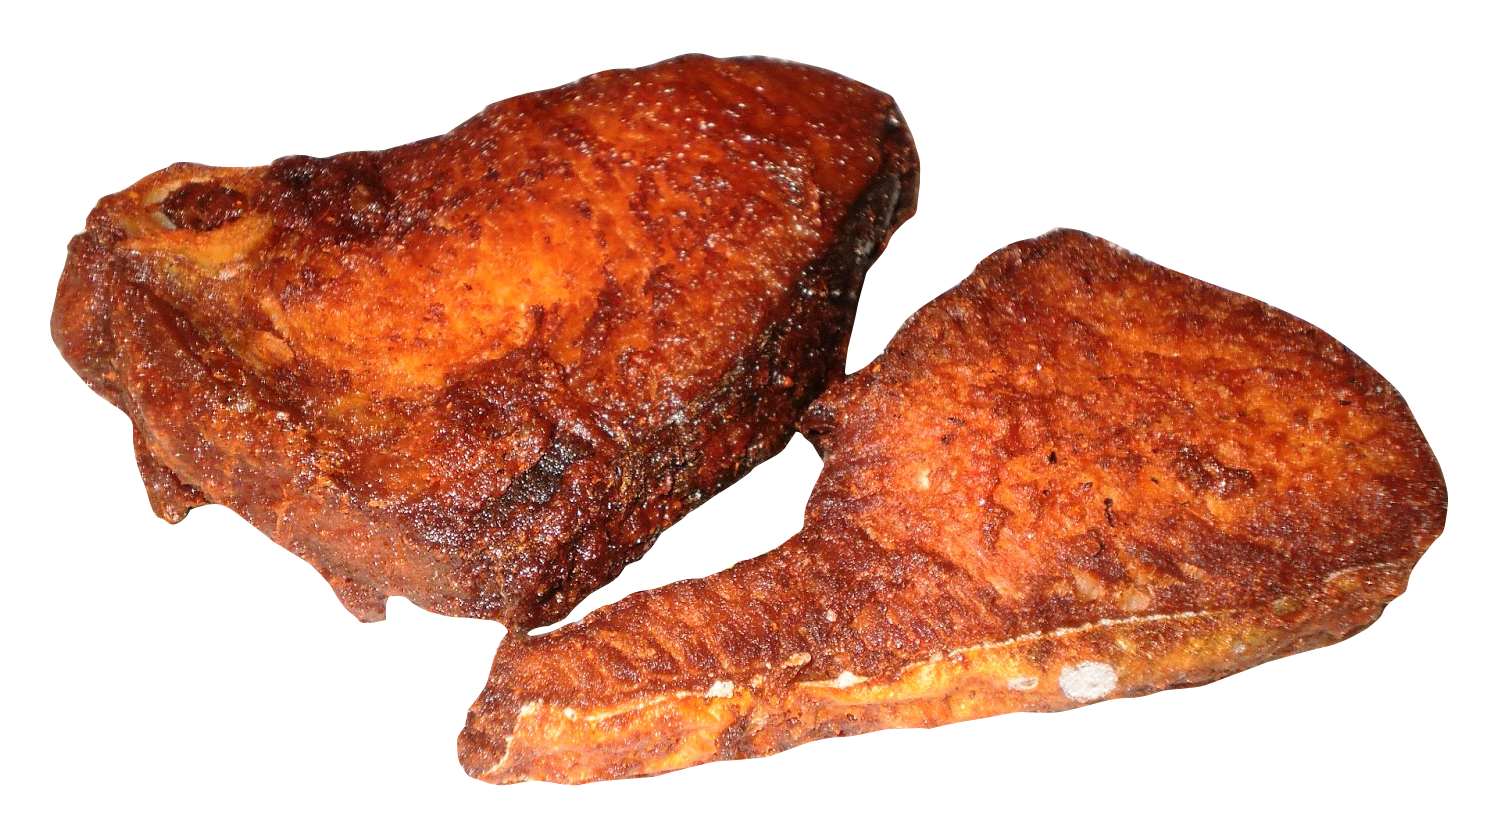 Fried Fish Png Transparent Image - Fish Fry, Transparent background PNG HD thumbnail